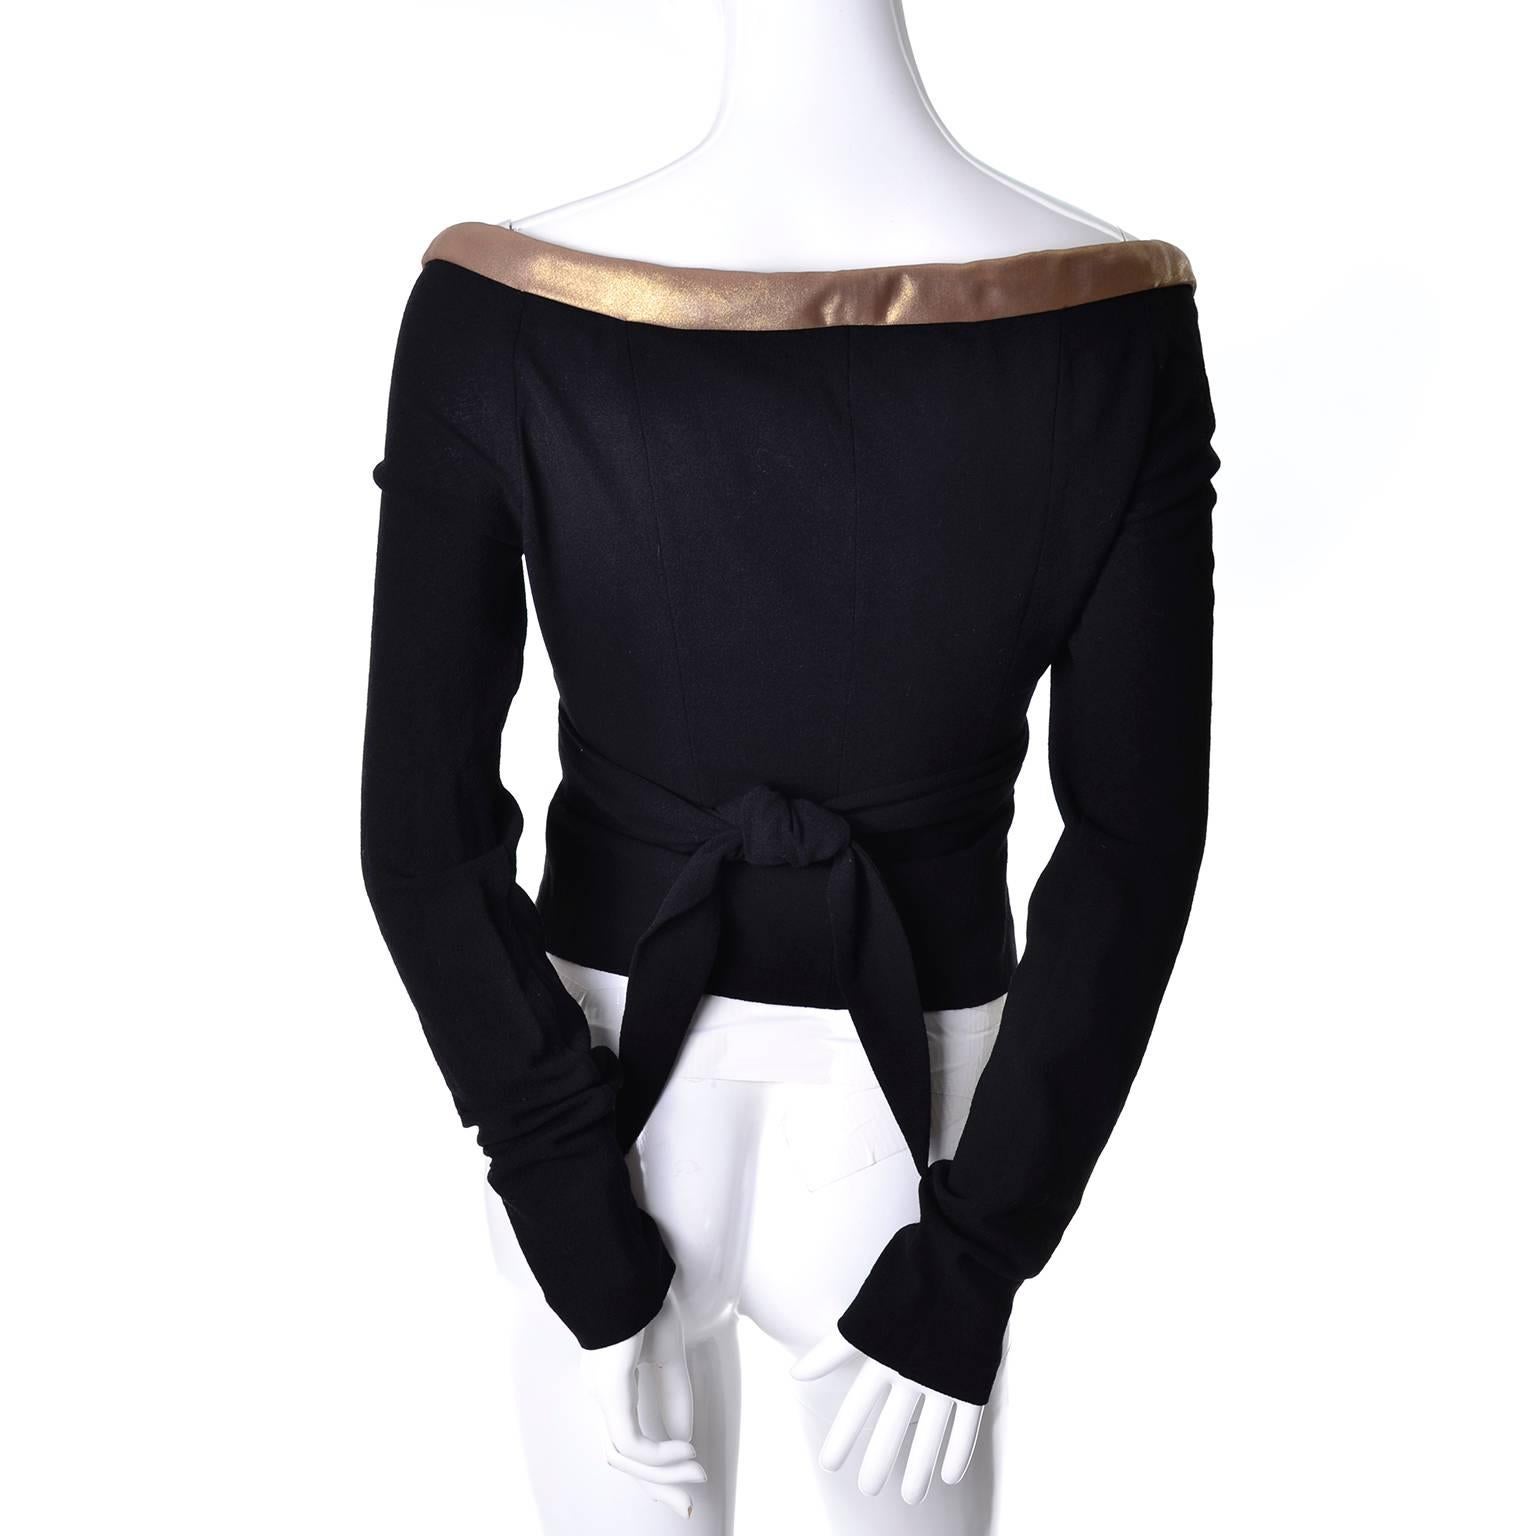 Donna Karan Black Stretch Crepe Wool Vintage Wrap Top with Gold Trim NWT Small 1